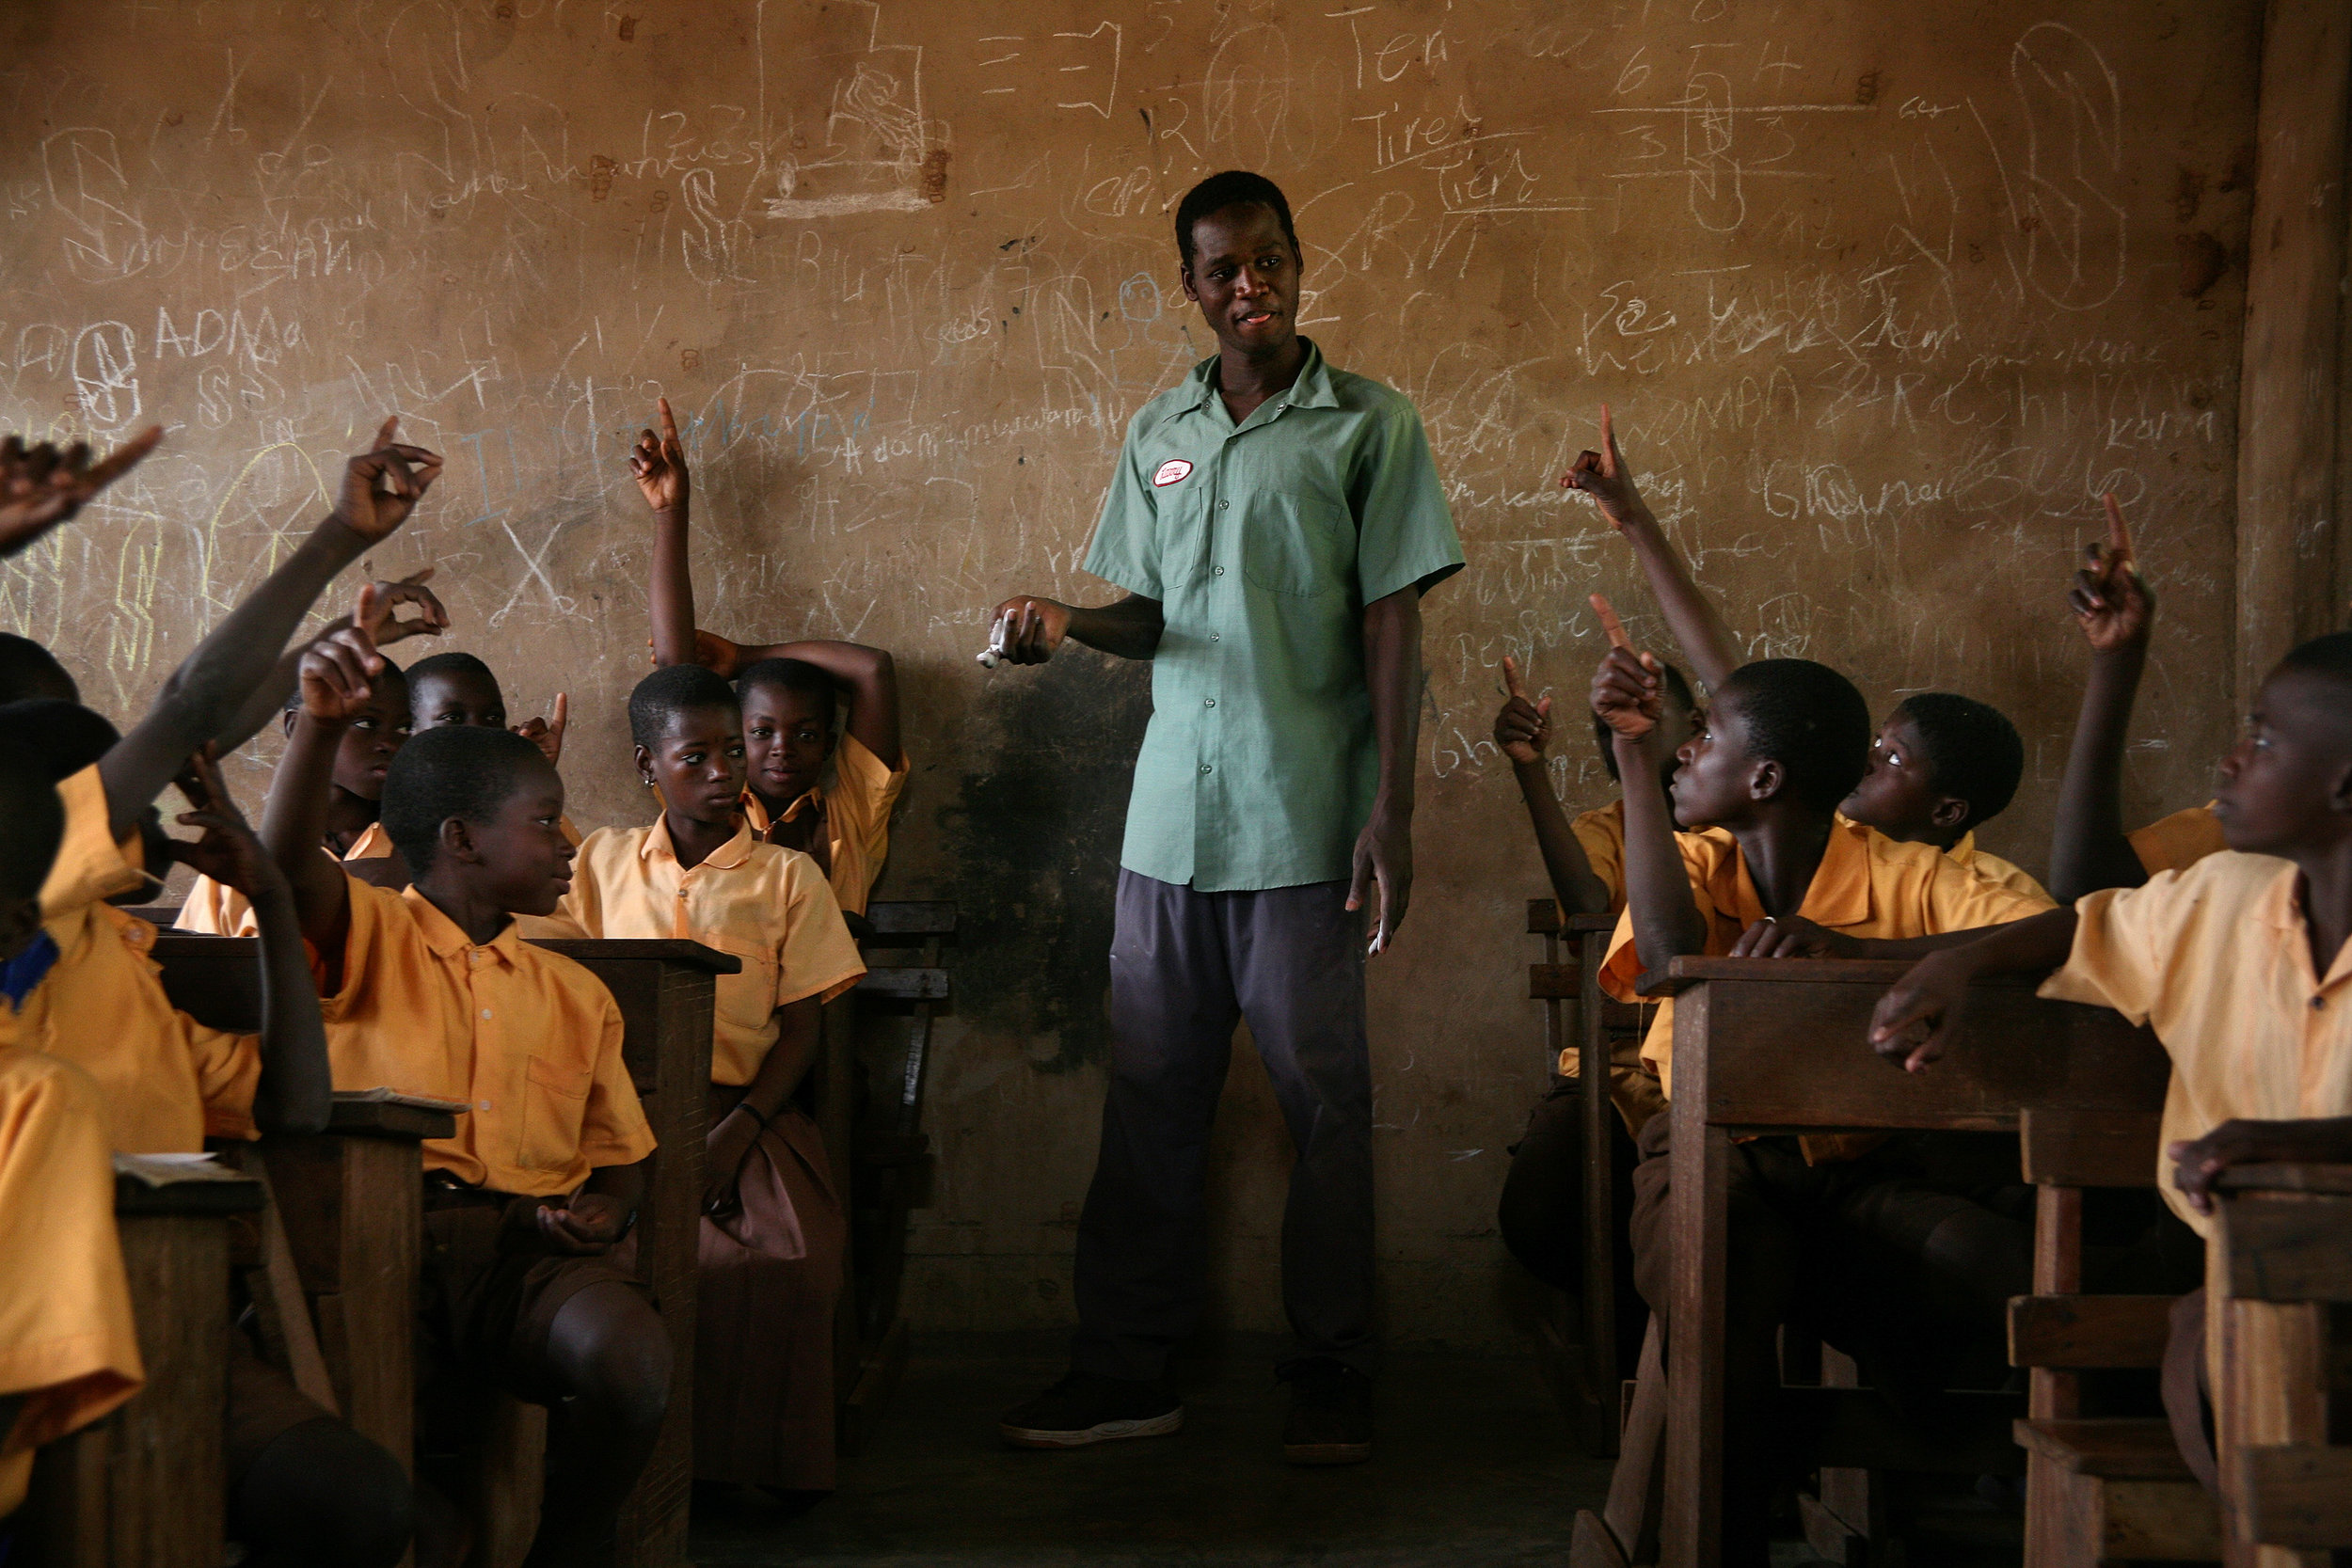  Sualey, a Ghanaian National Health Service Volunteer, quizzes children on Guinea worm prevention in the Wantugu Roman Catholic Primary School in Wantugu, Ghana on March 14, 2007. 